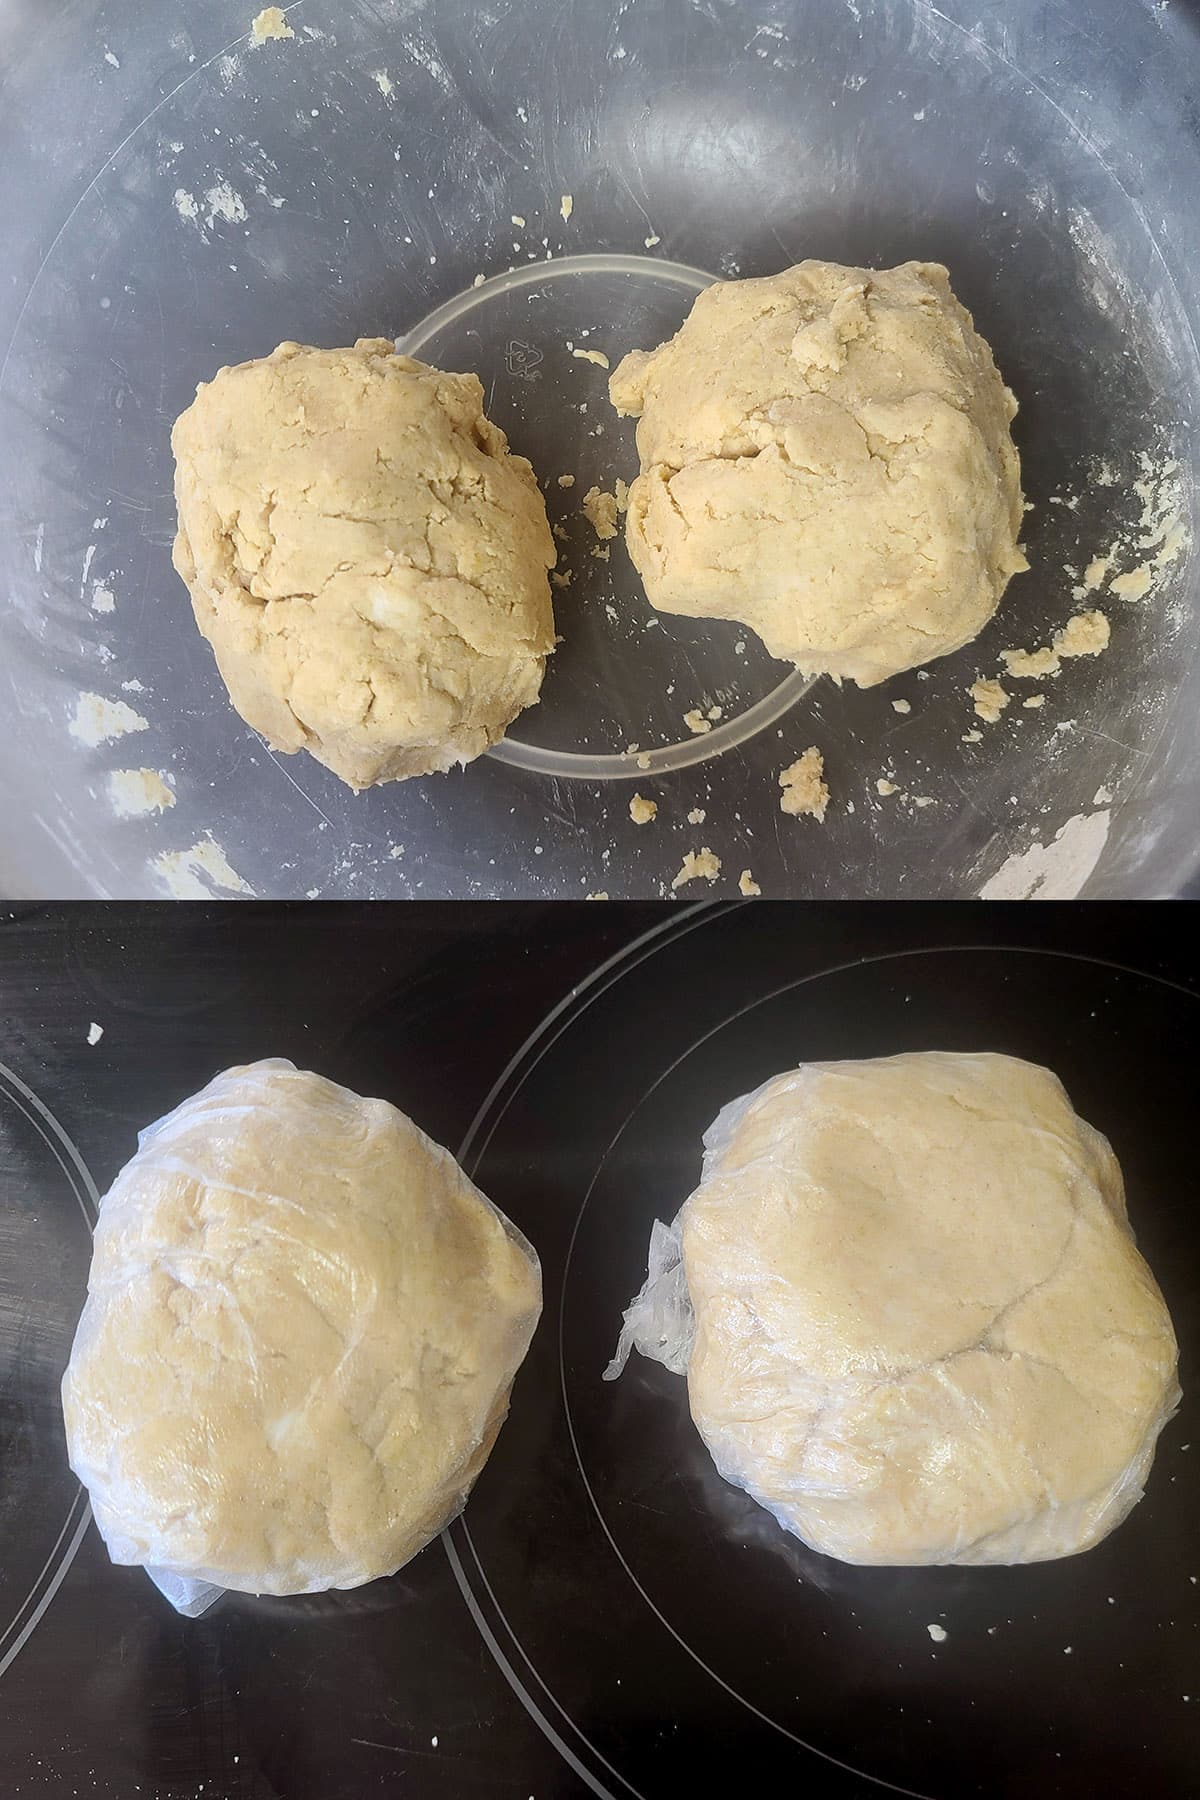 A 2 part image showing  2 dough balls being wrapped in plastic.